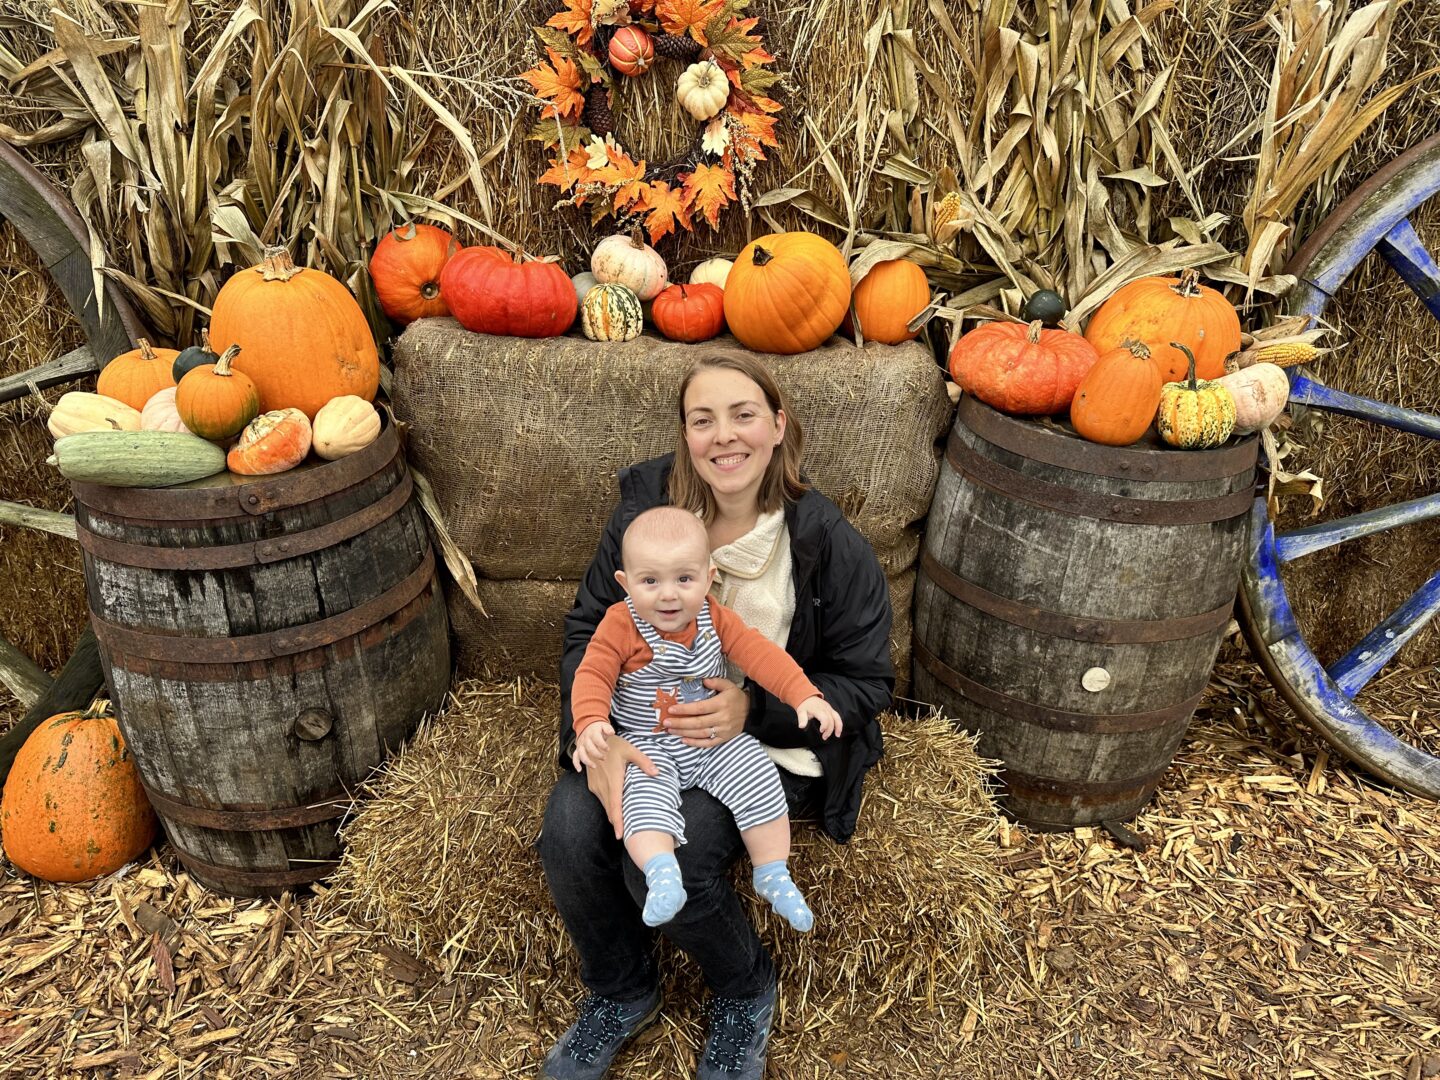 woman in a white fleece and black coat sits on a hay bale with a baby in stripy dungarees on her lap. Behind them is a display of lots of orange pumpkins